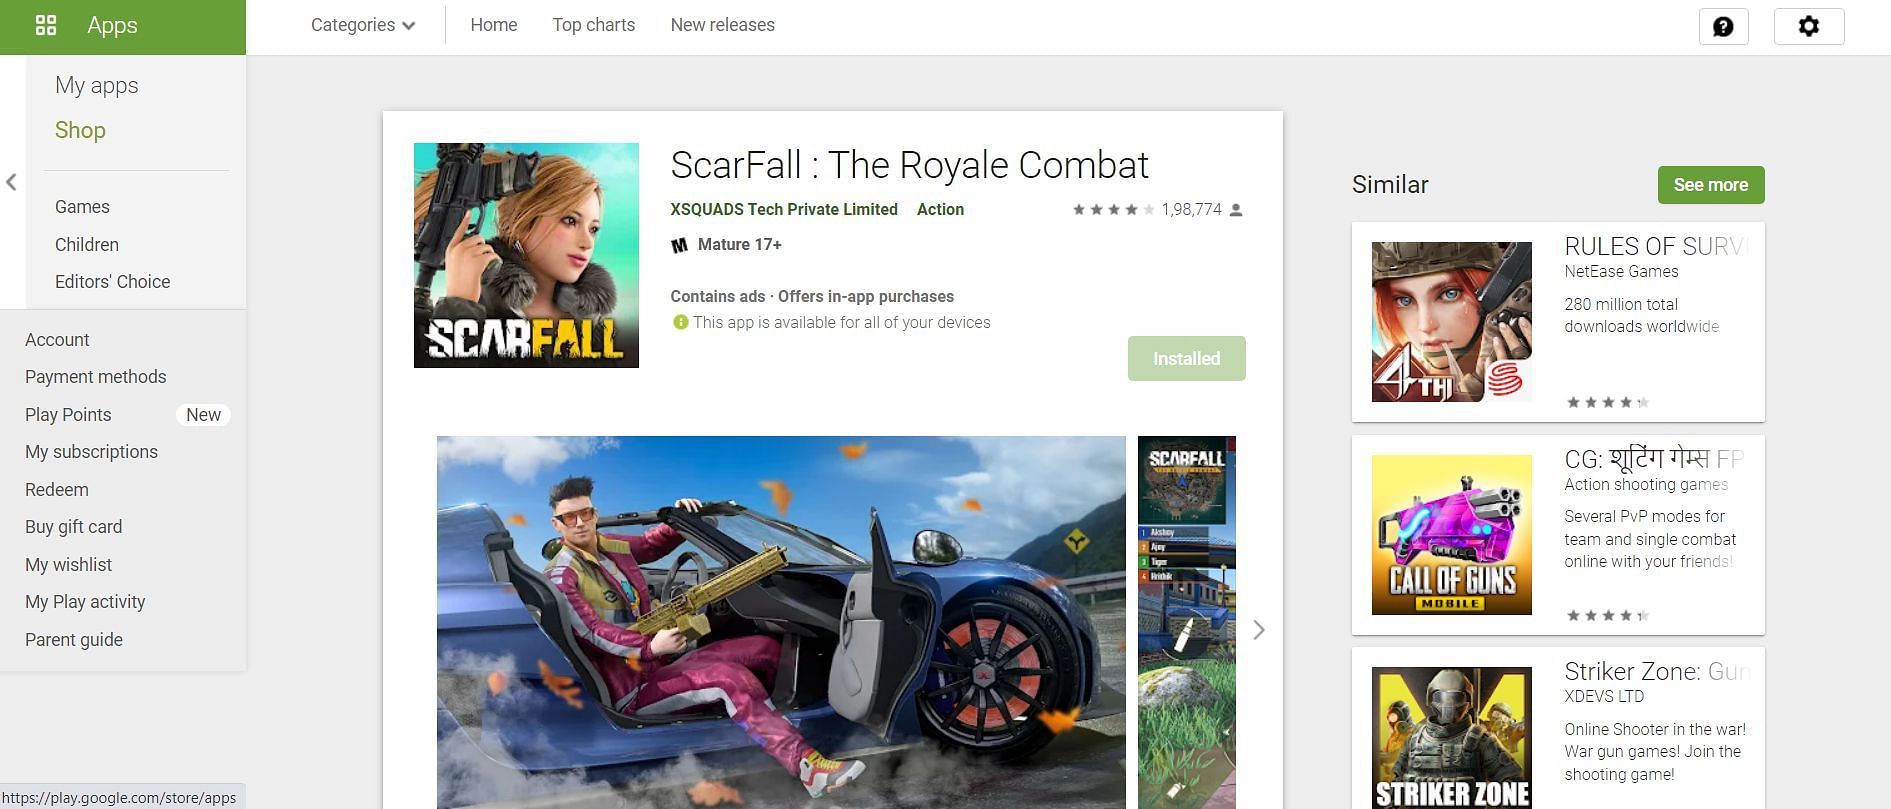 &quot;ScarFall : The Royale Combat&quot; is among the games that can pose some competition to BGMI's Lite variant in the low-end segment (Image via Google Play Store)